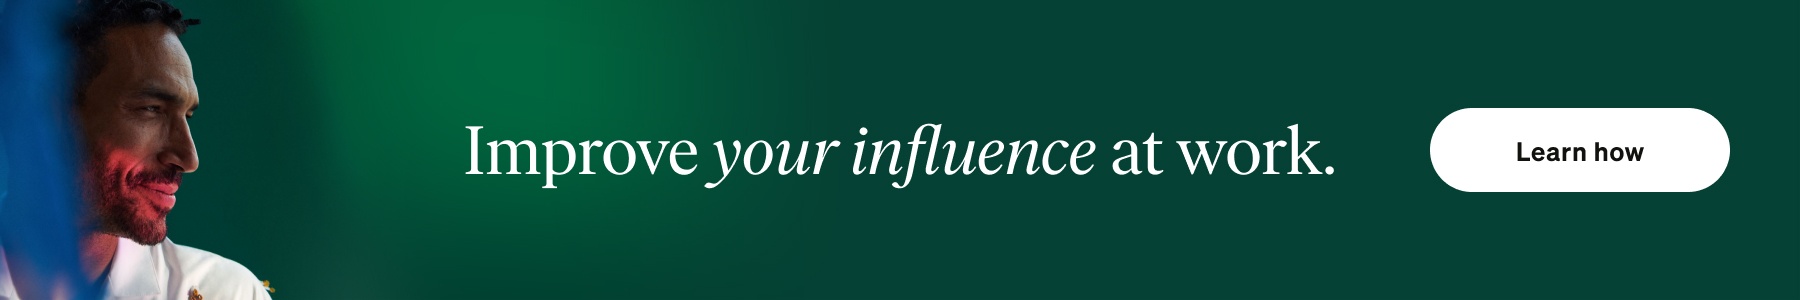 improve influence - coaching for individuals